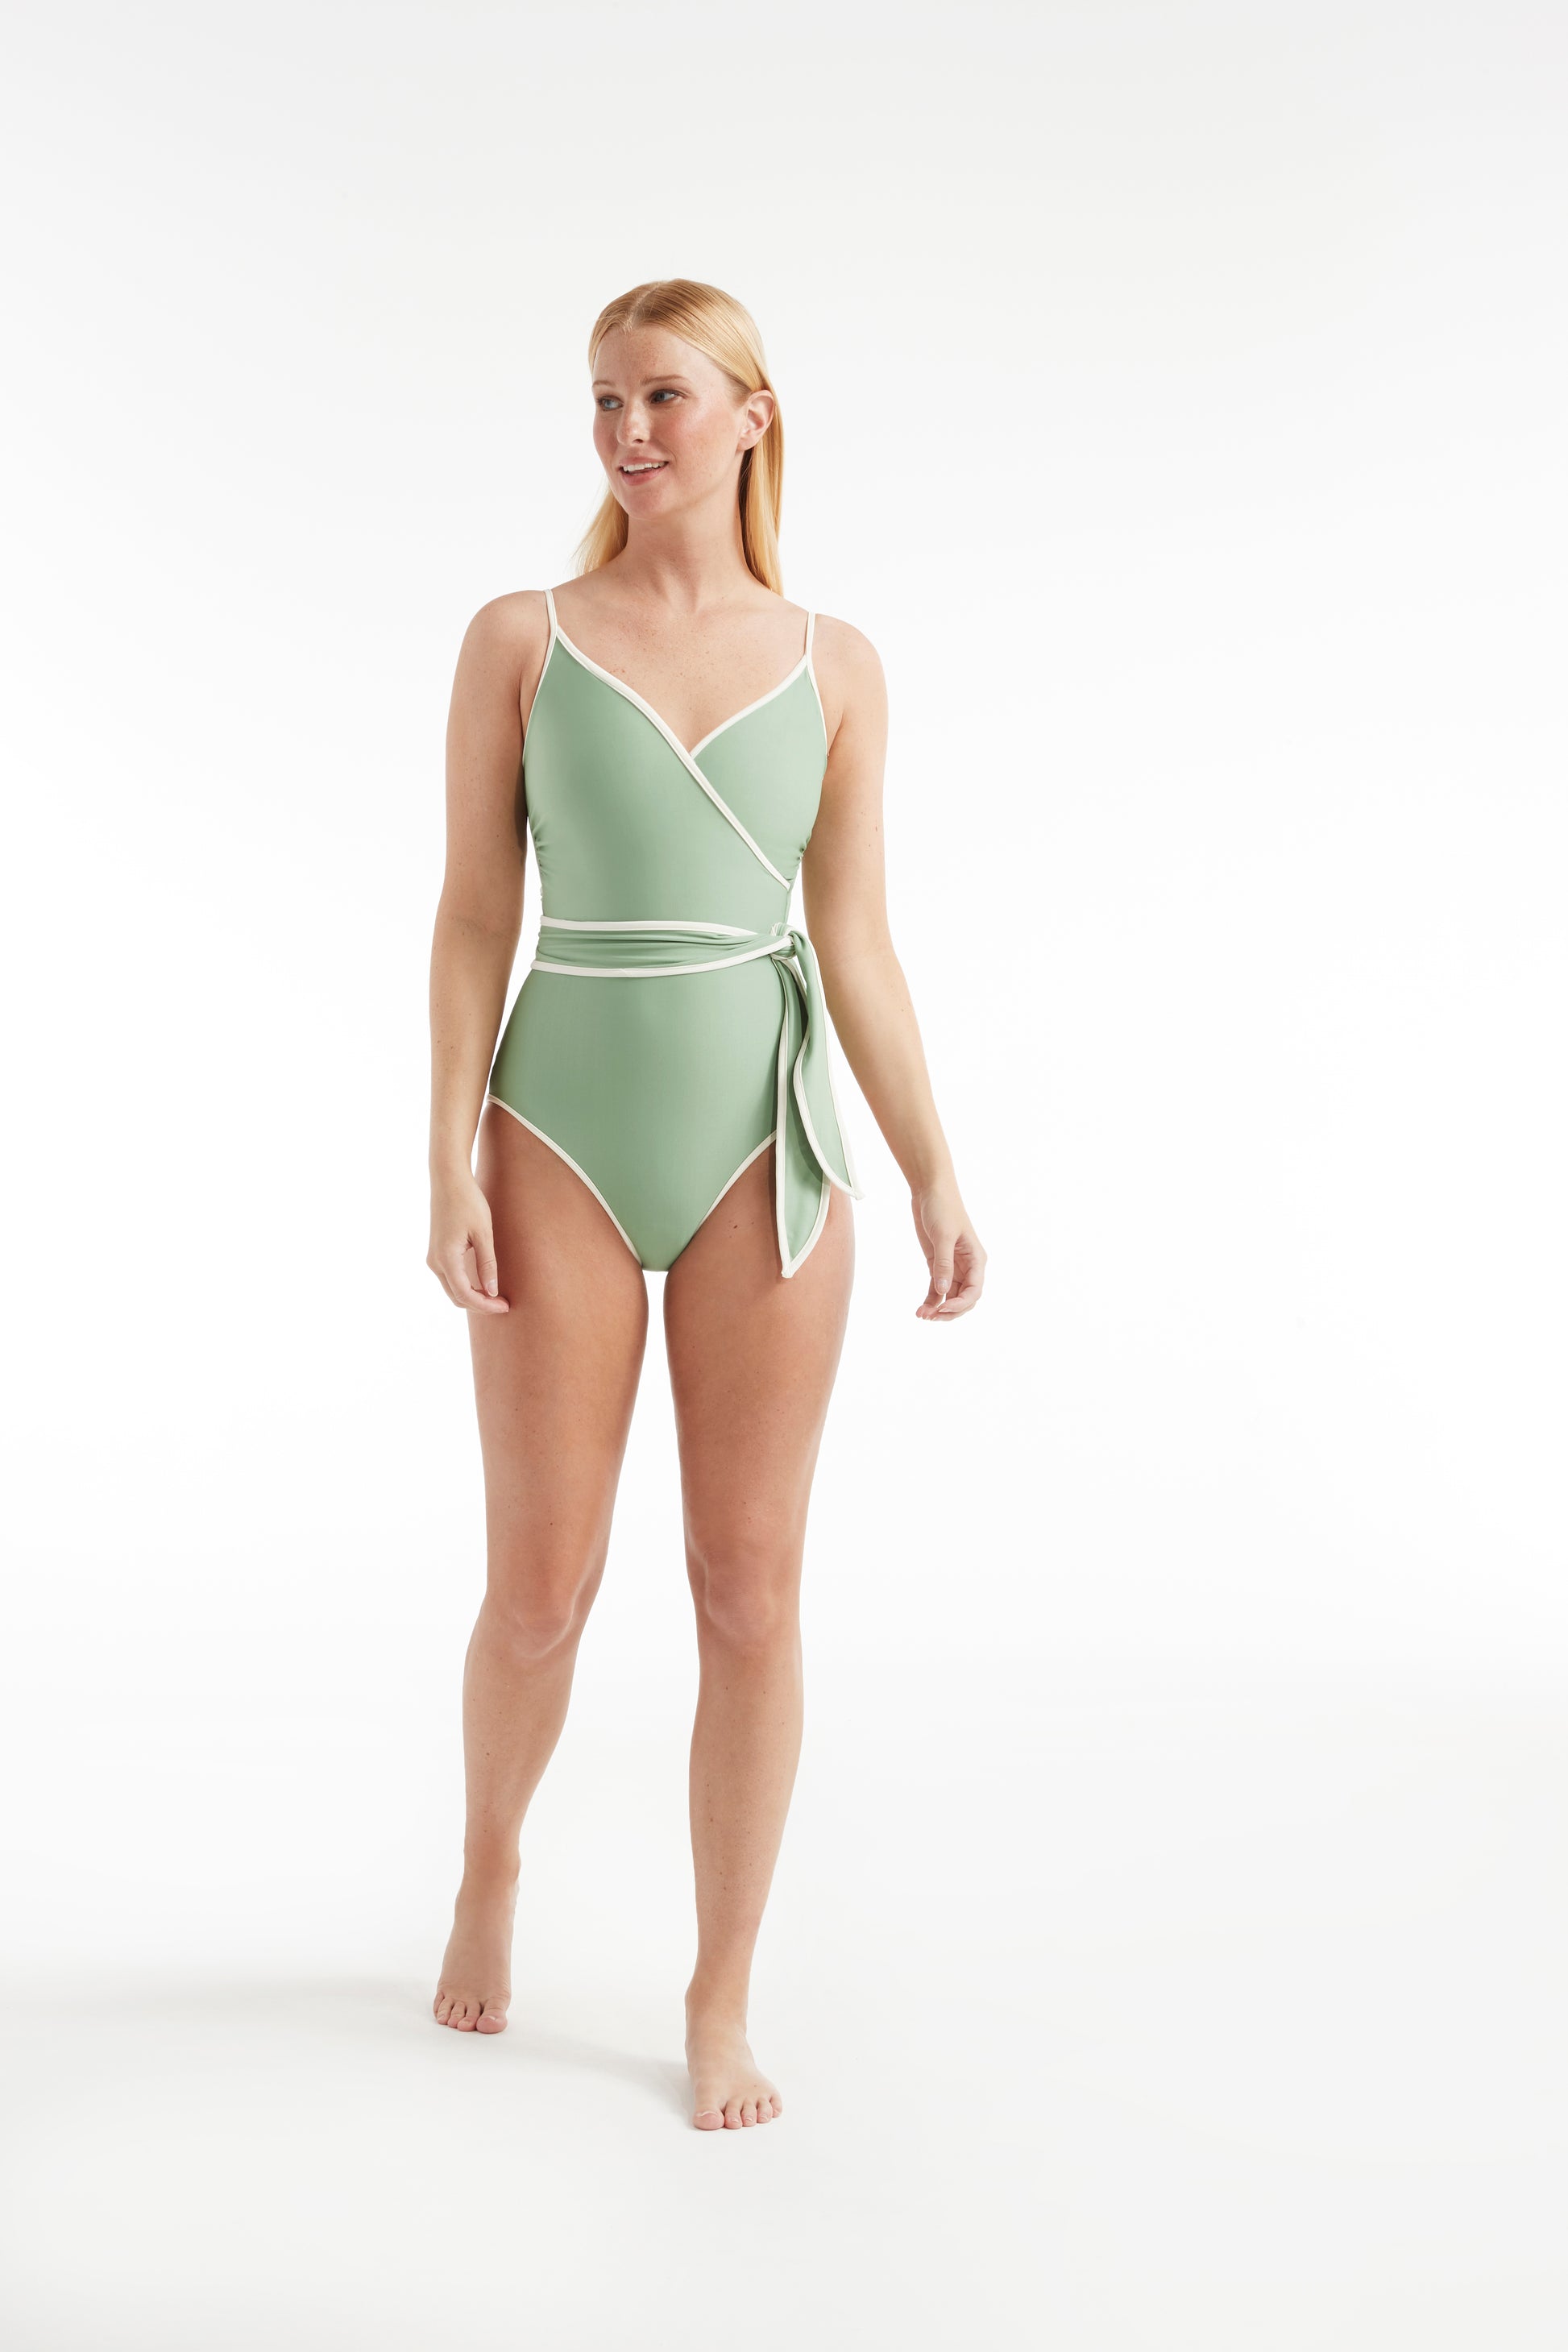 Sun protective swimsuit for women and for teenagers Amelia in Ash